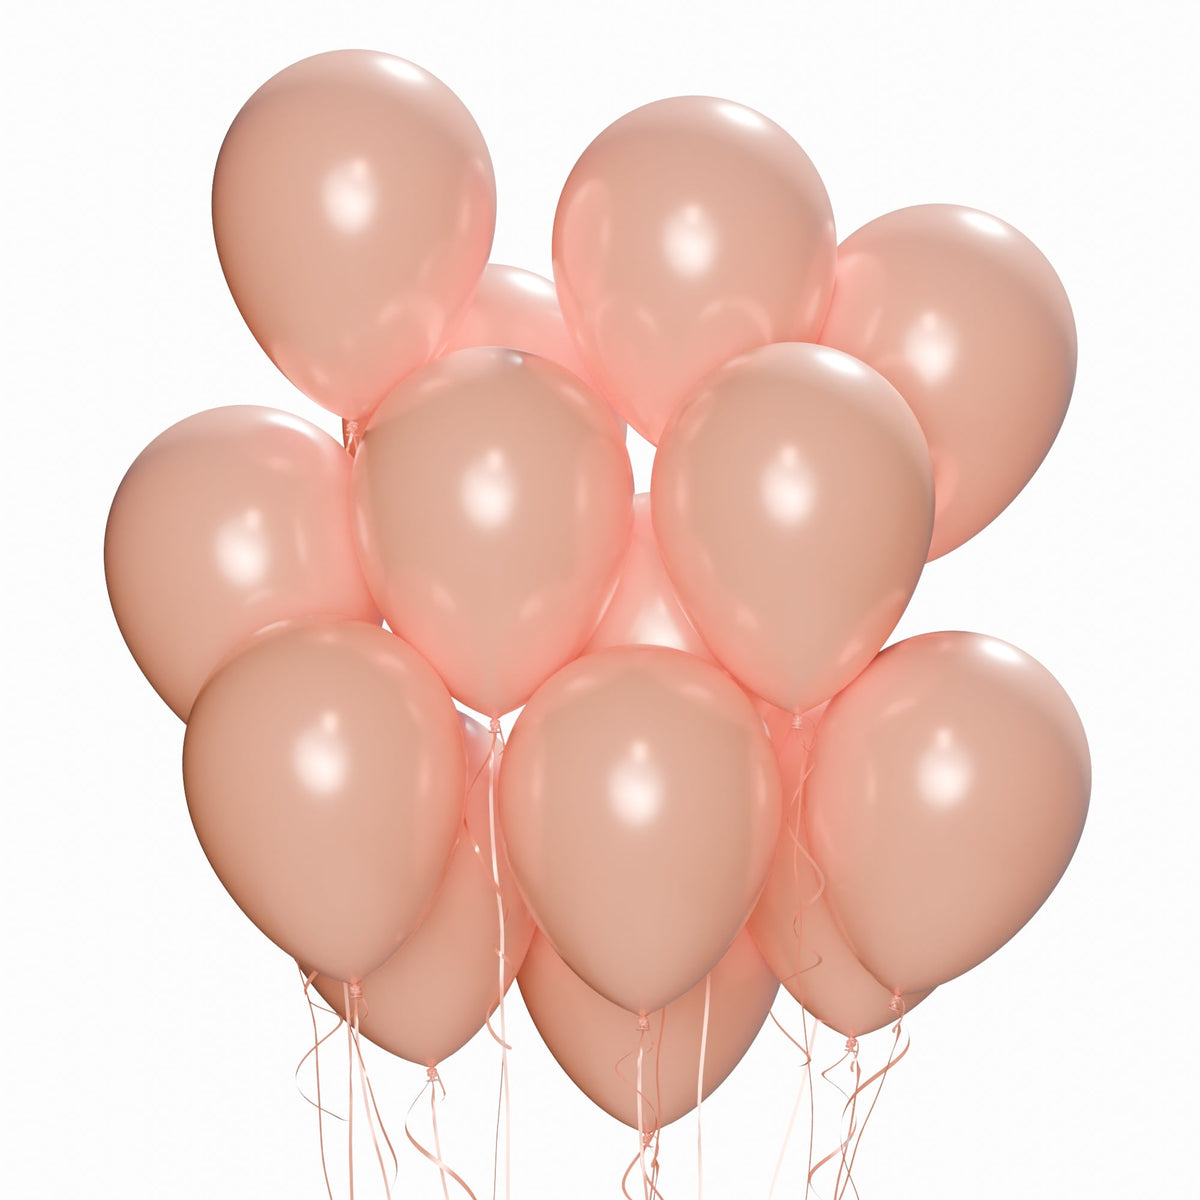 WIDE OCEAN INTERNATIONAL TRADE BEIJING CO., LTD Balloons Rosegold Latex Balloon 12 Inches, Pearl Collection, 72 Count 810064198359